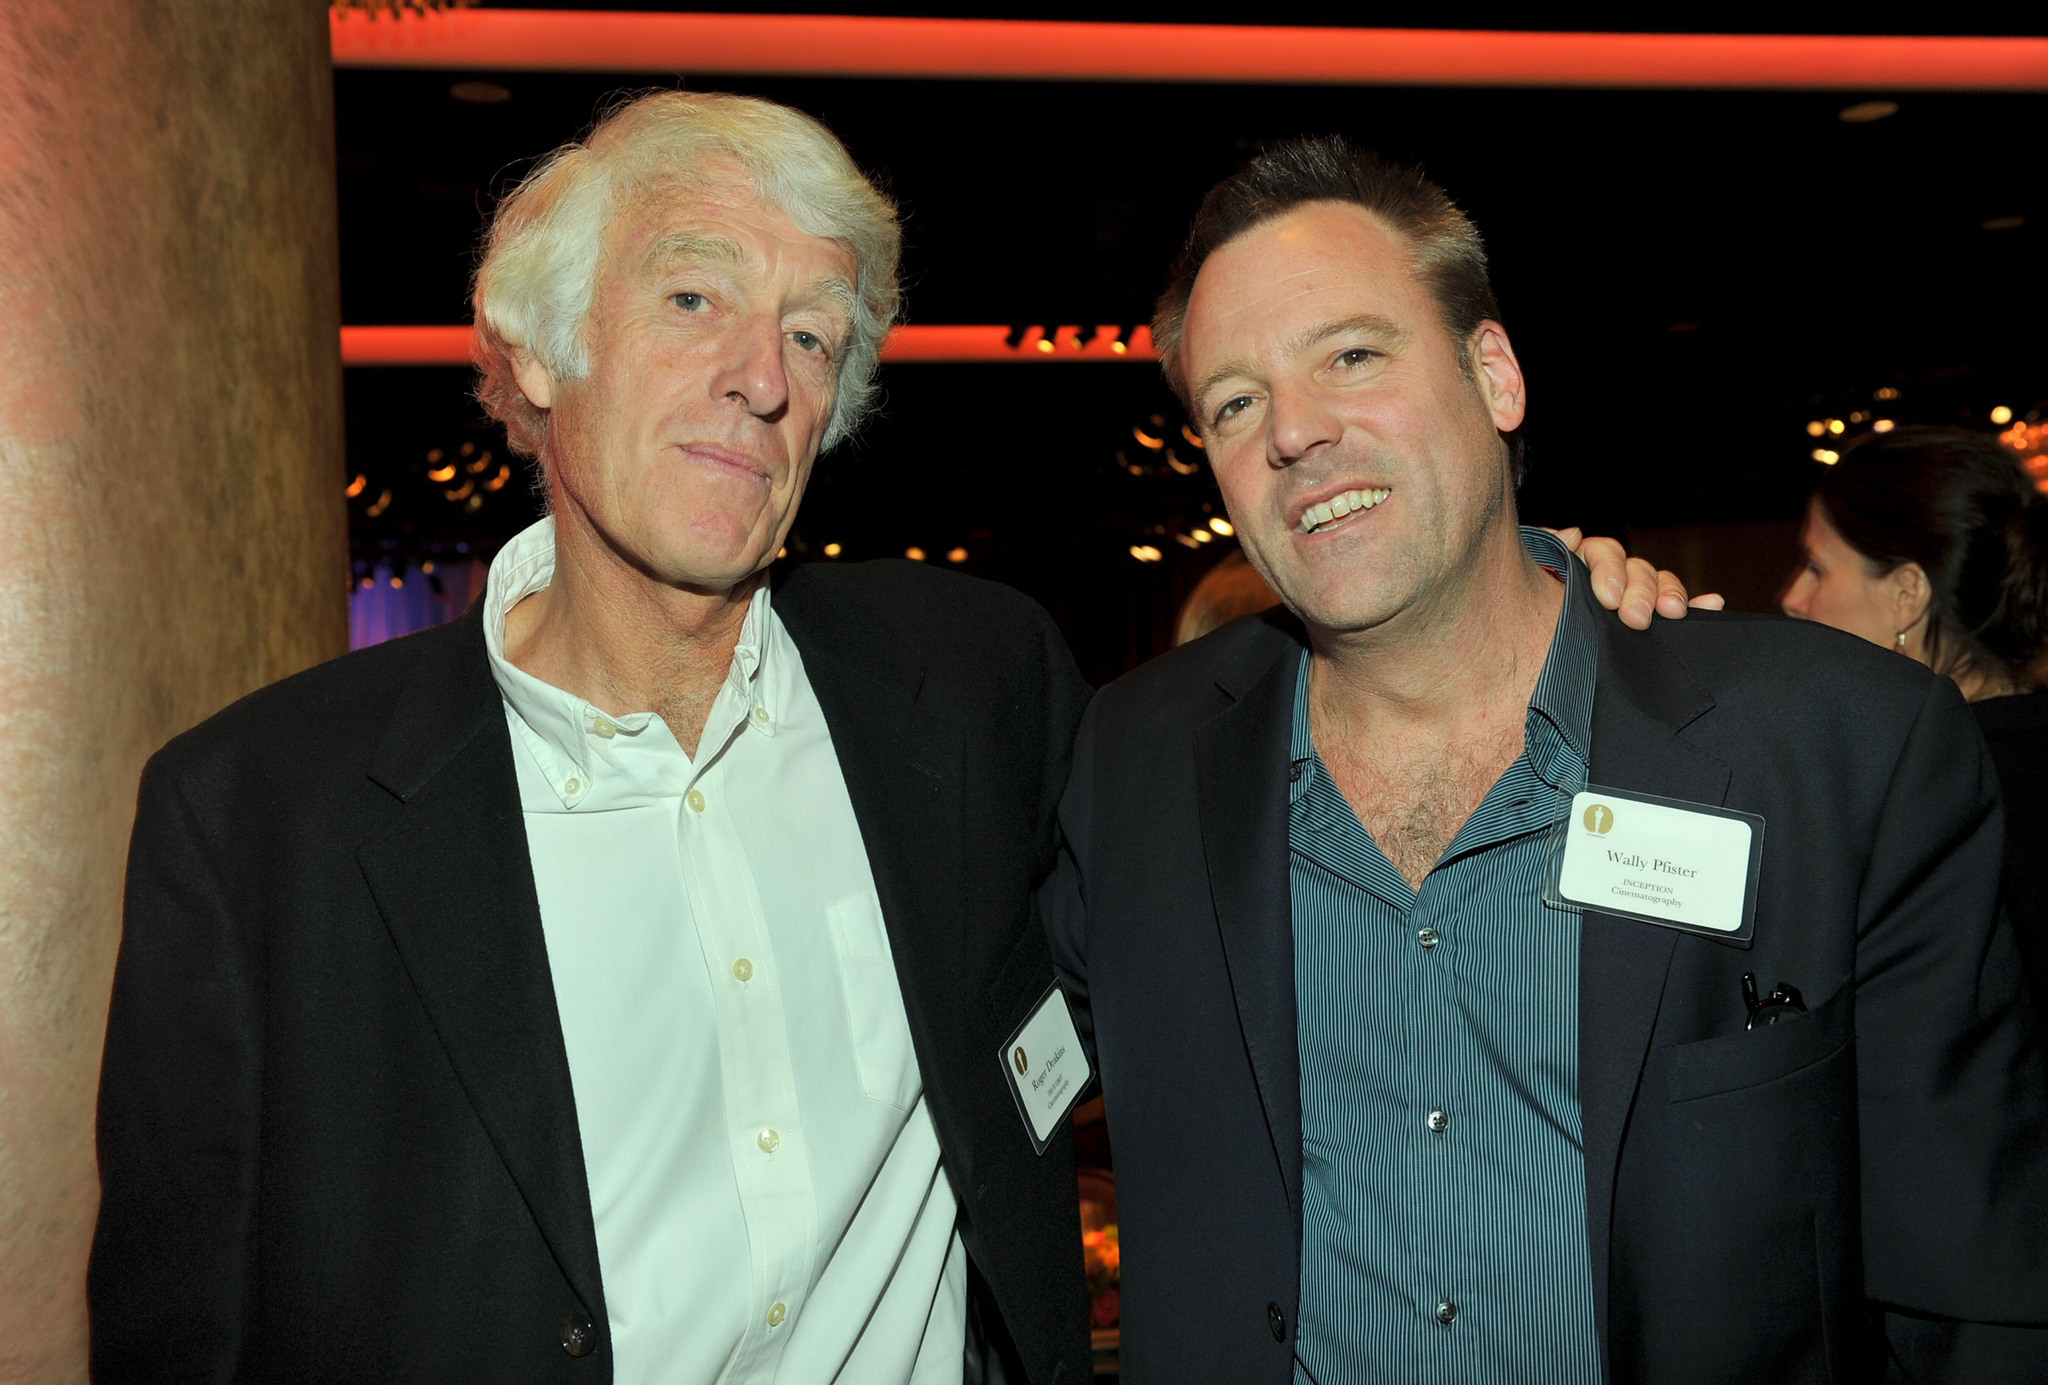 Wally Pfister and Roger Deakins